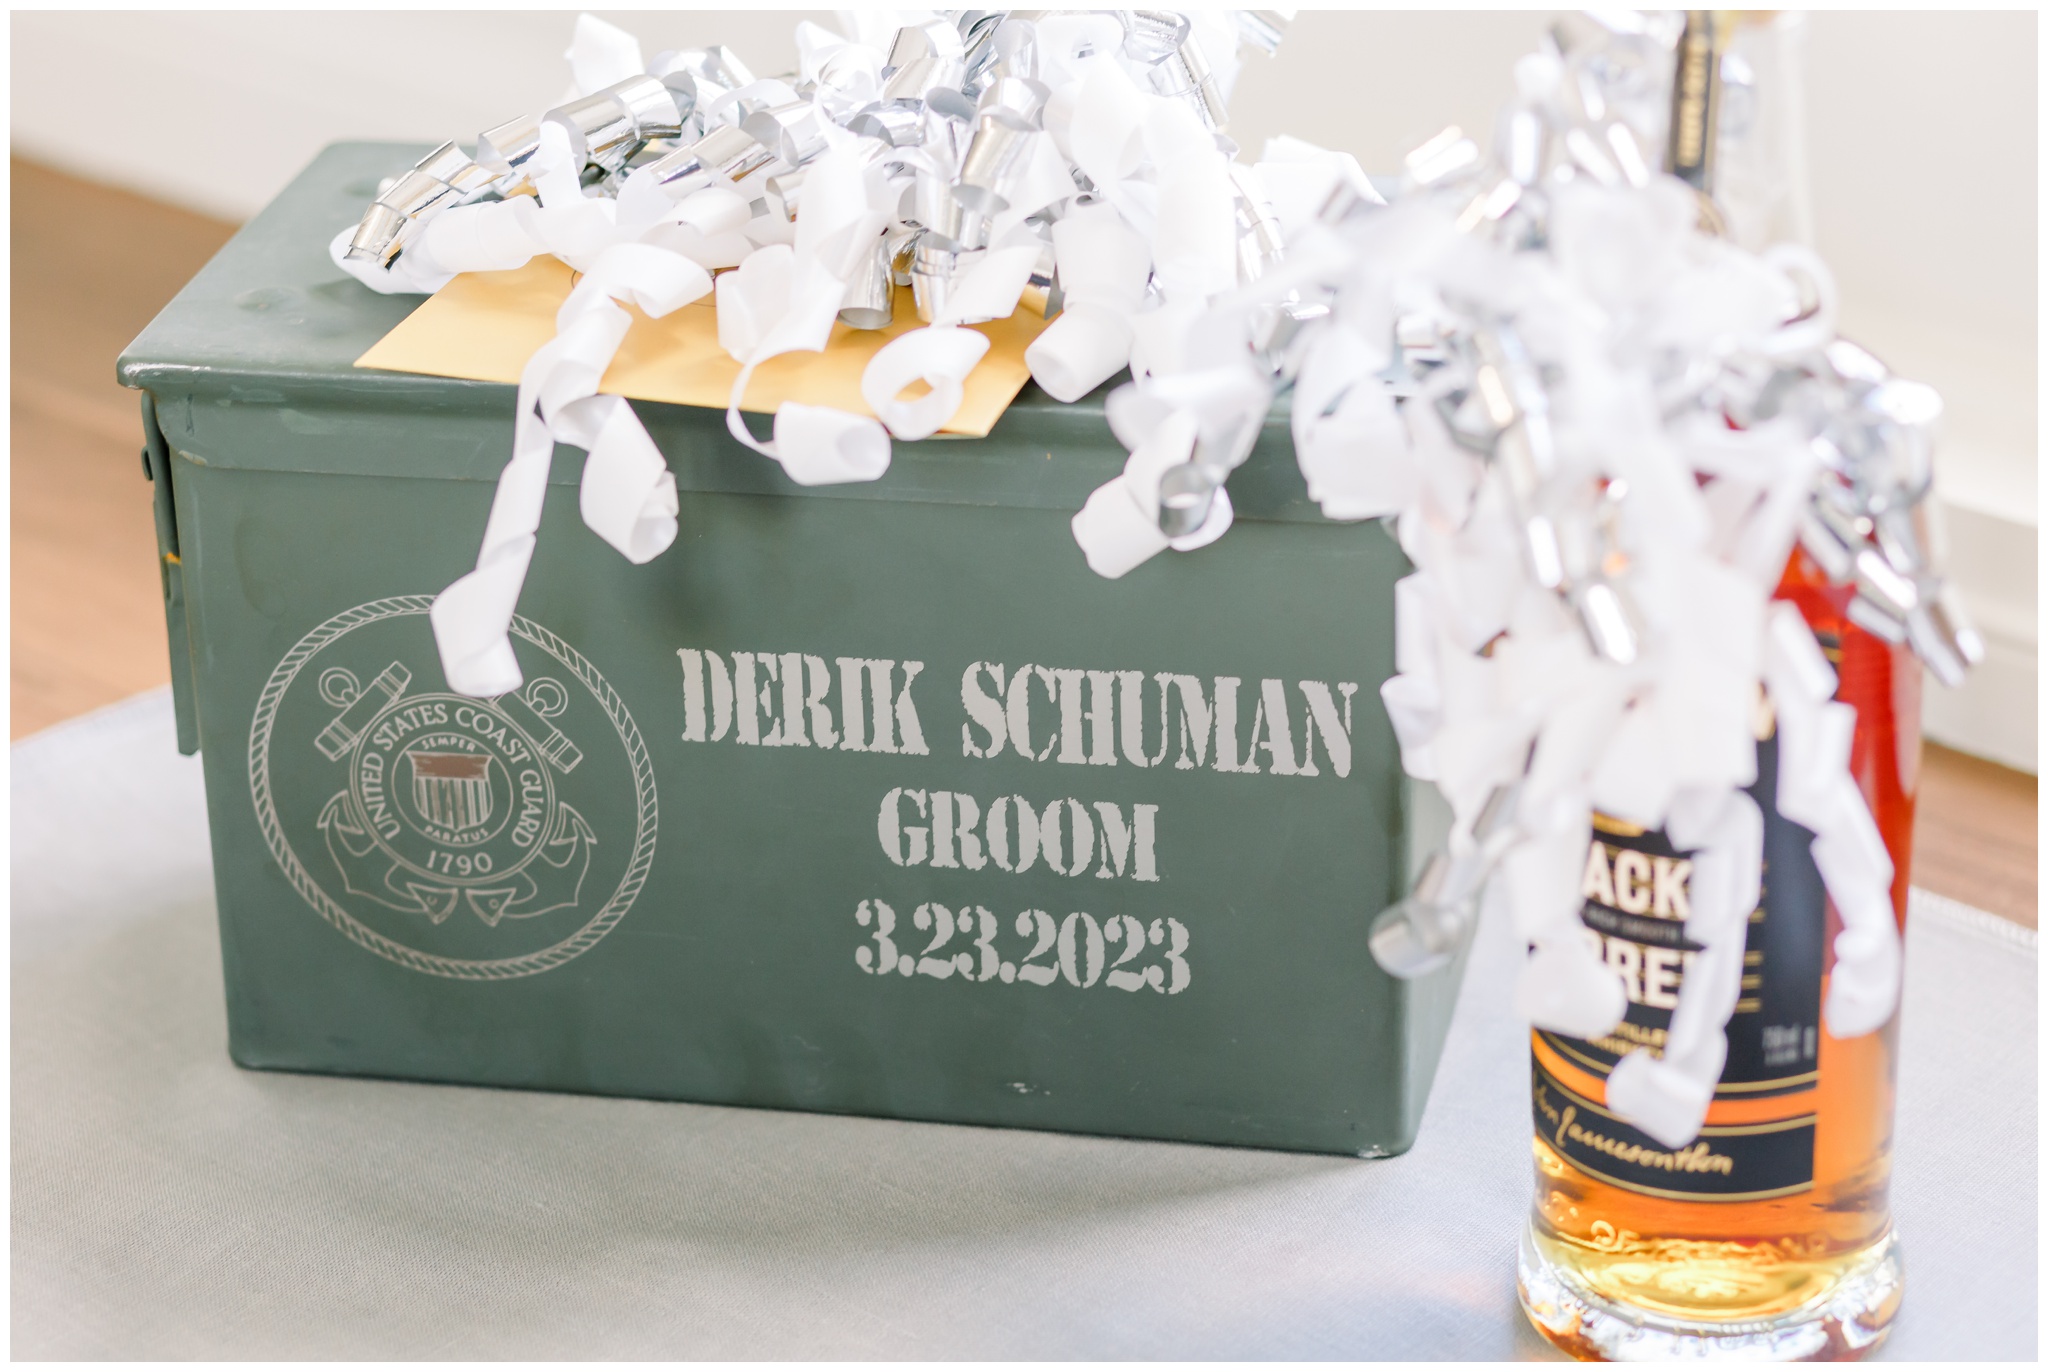 Groom gift, ammo box personalized